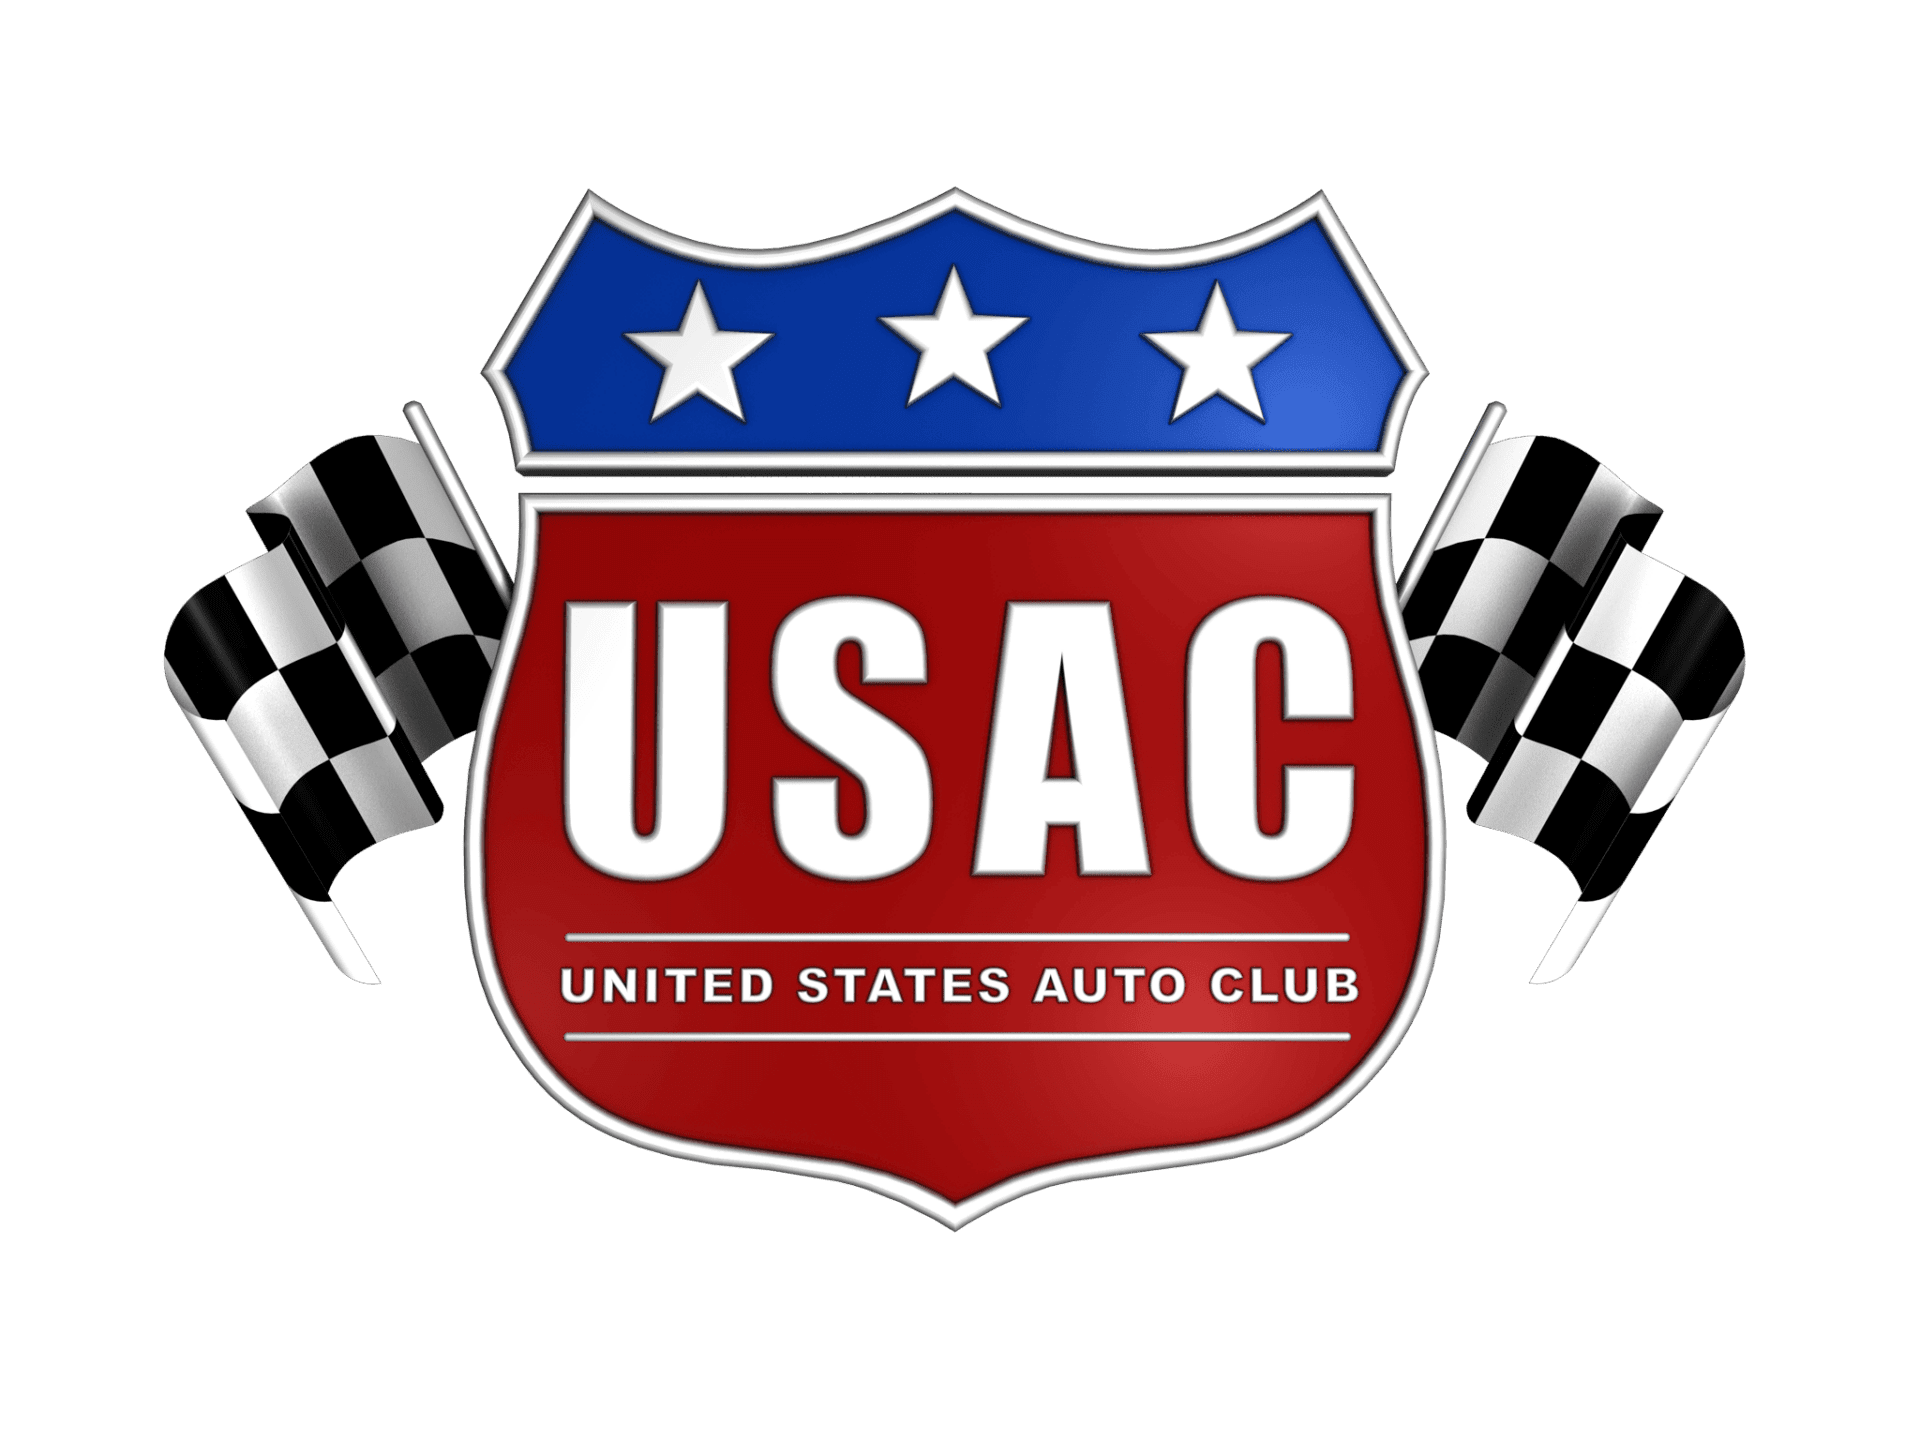 SHAMROCK ENTRY LIST UP TO 45 FOR MARCH 10 USAC MIDGET OPENER AT DuQUOIN